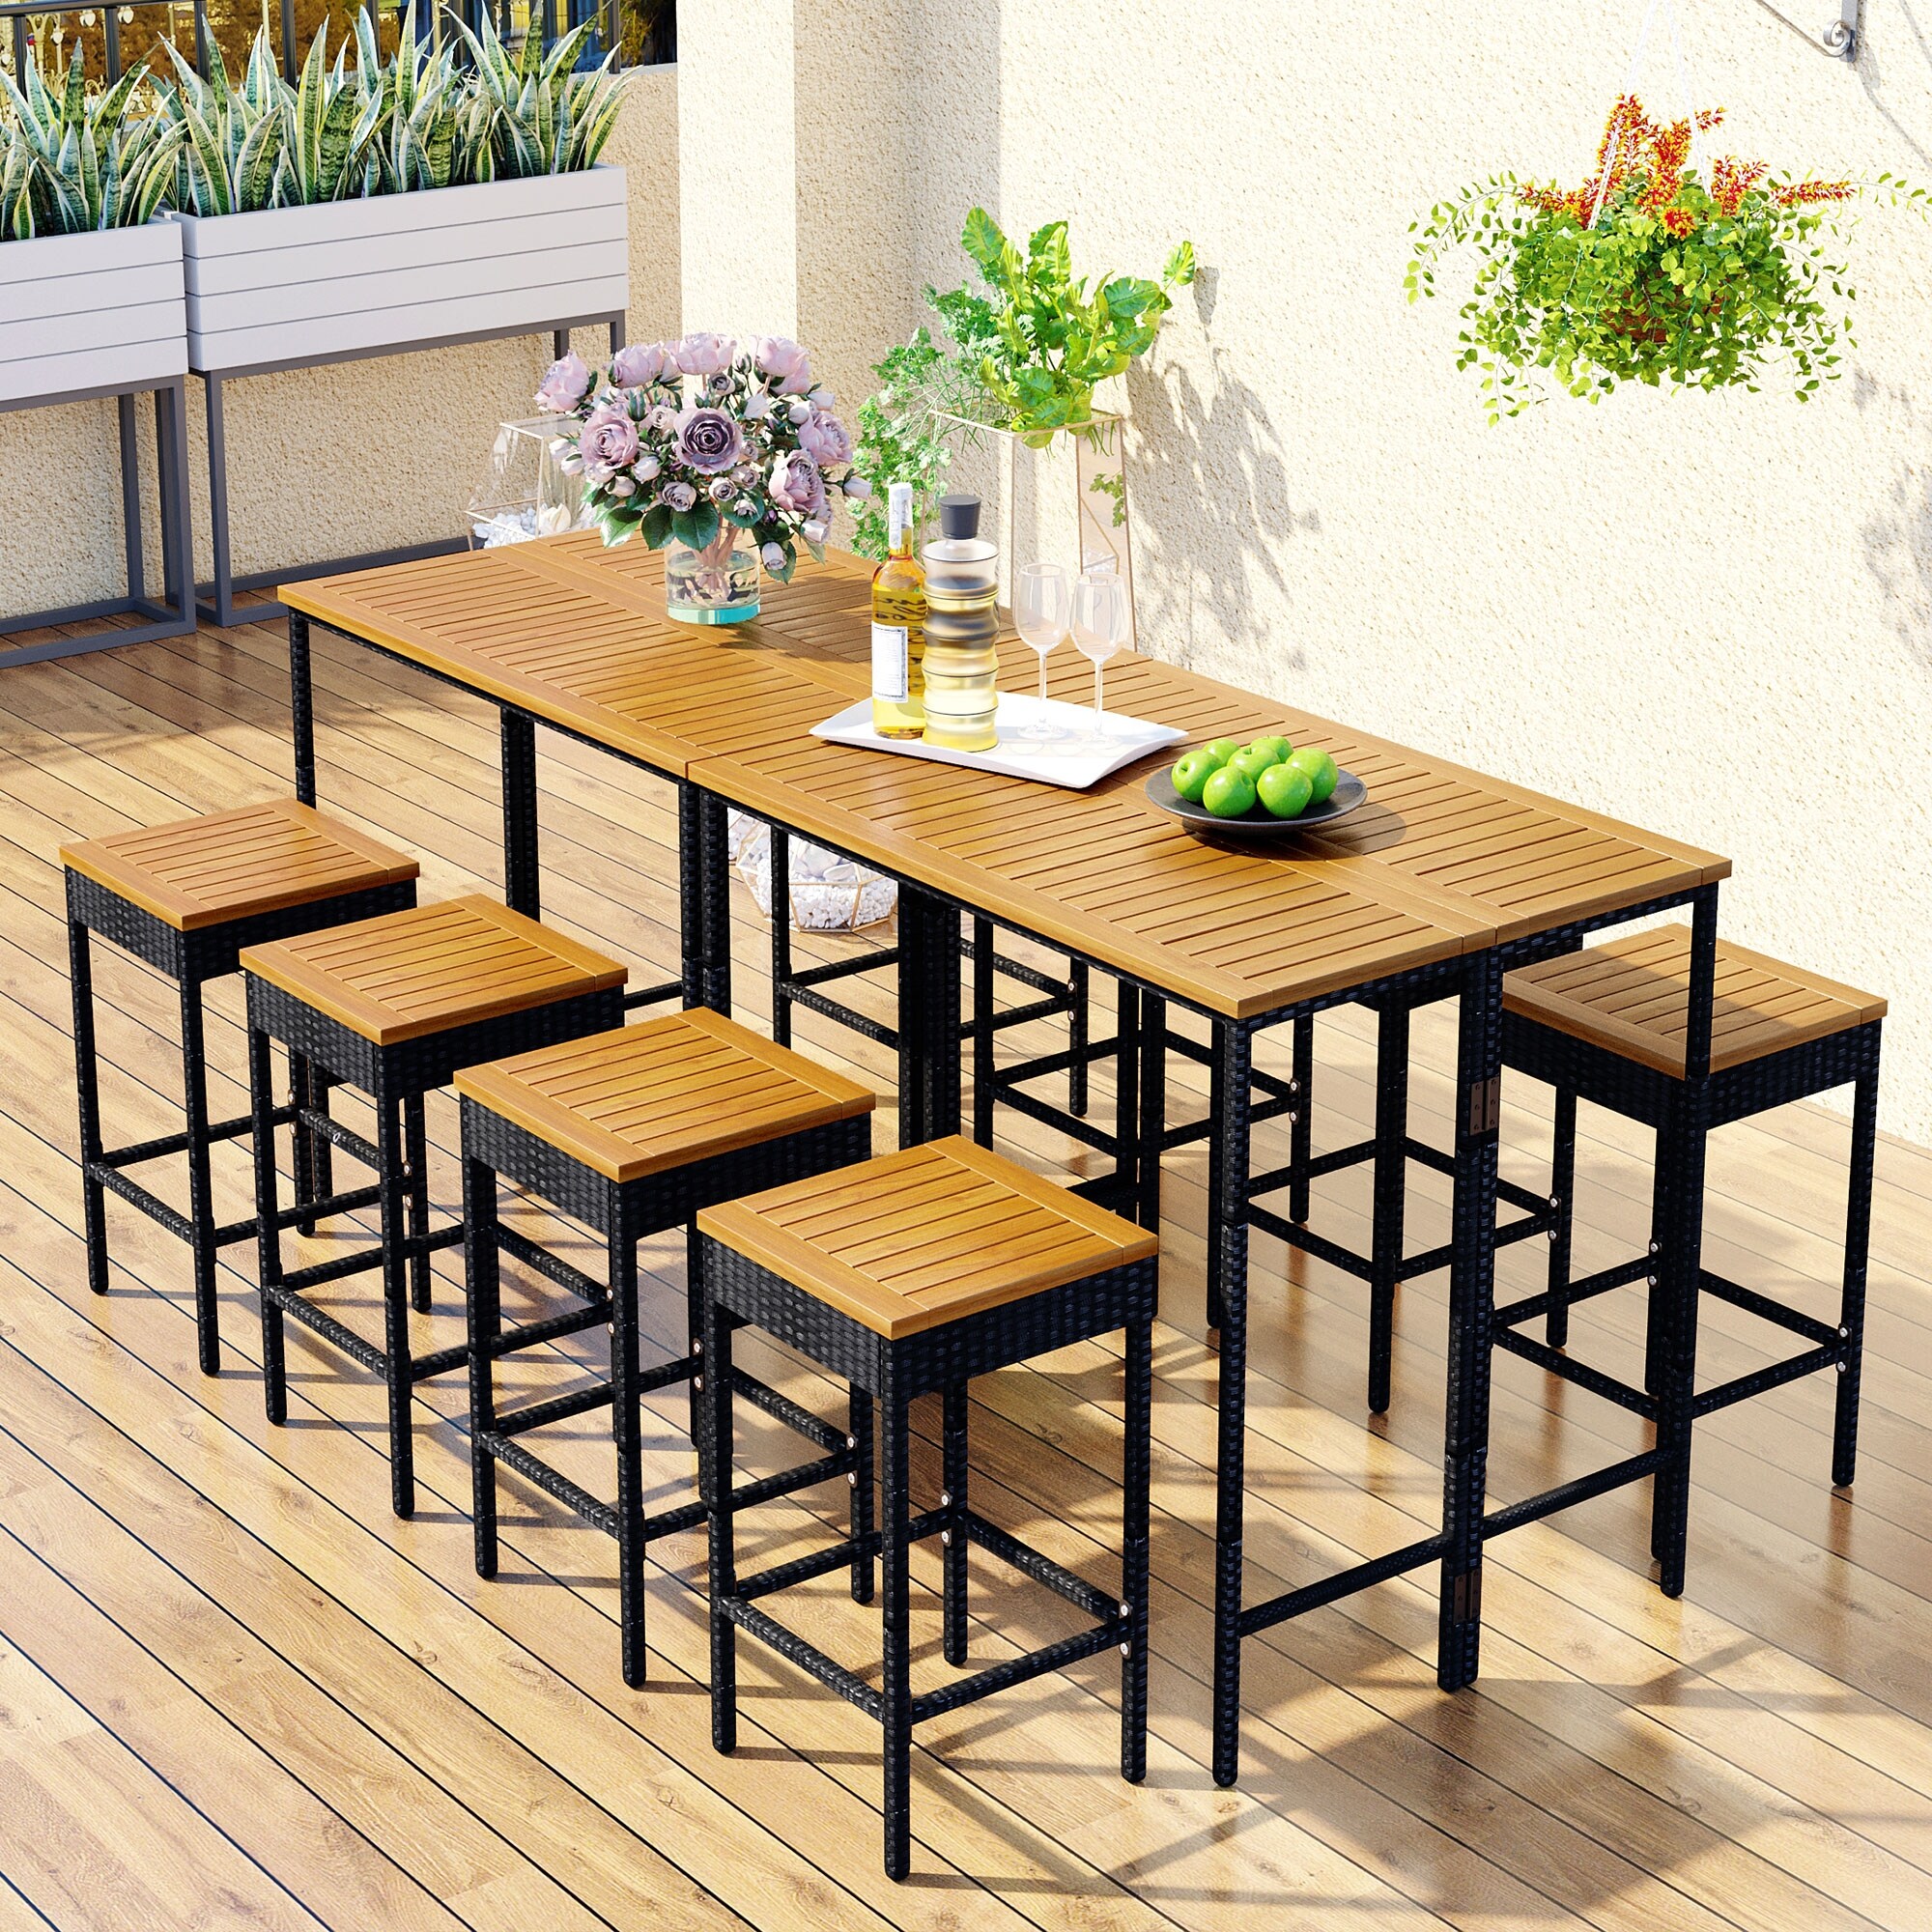 10-piece Garden Patio Bistro Sets  Outdoor Patio Wicker Dining Table Set With Foldable Tabletop  8 Stools And 2 Wood Table